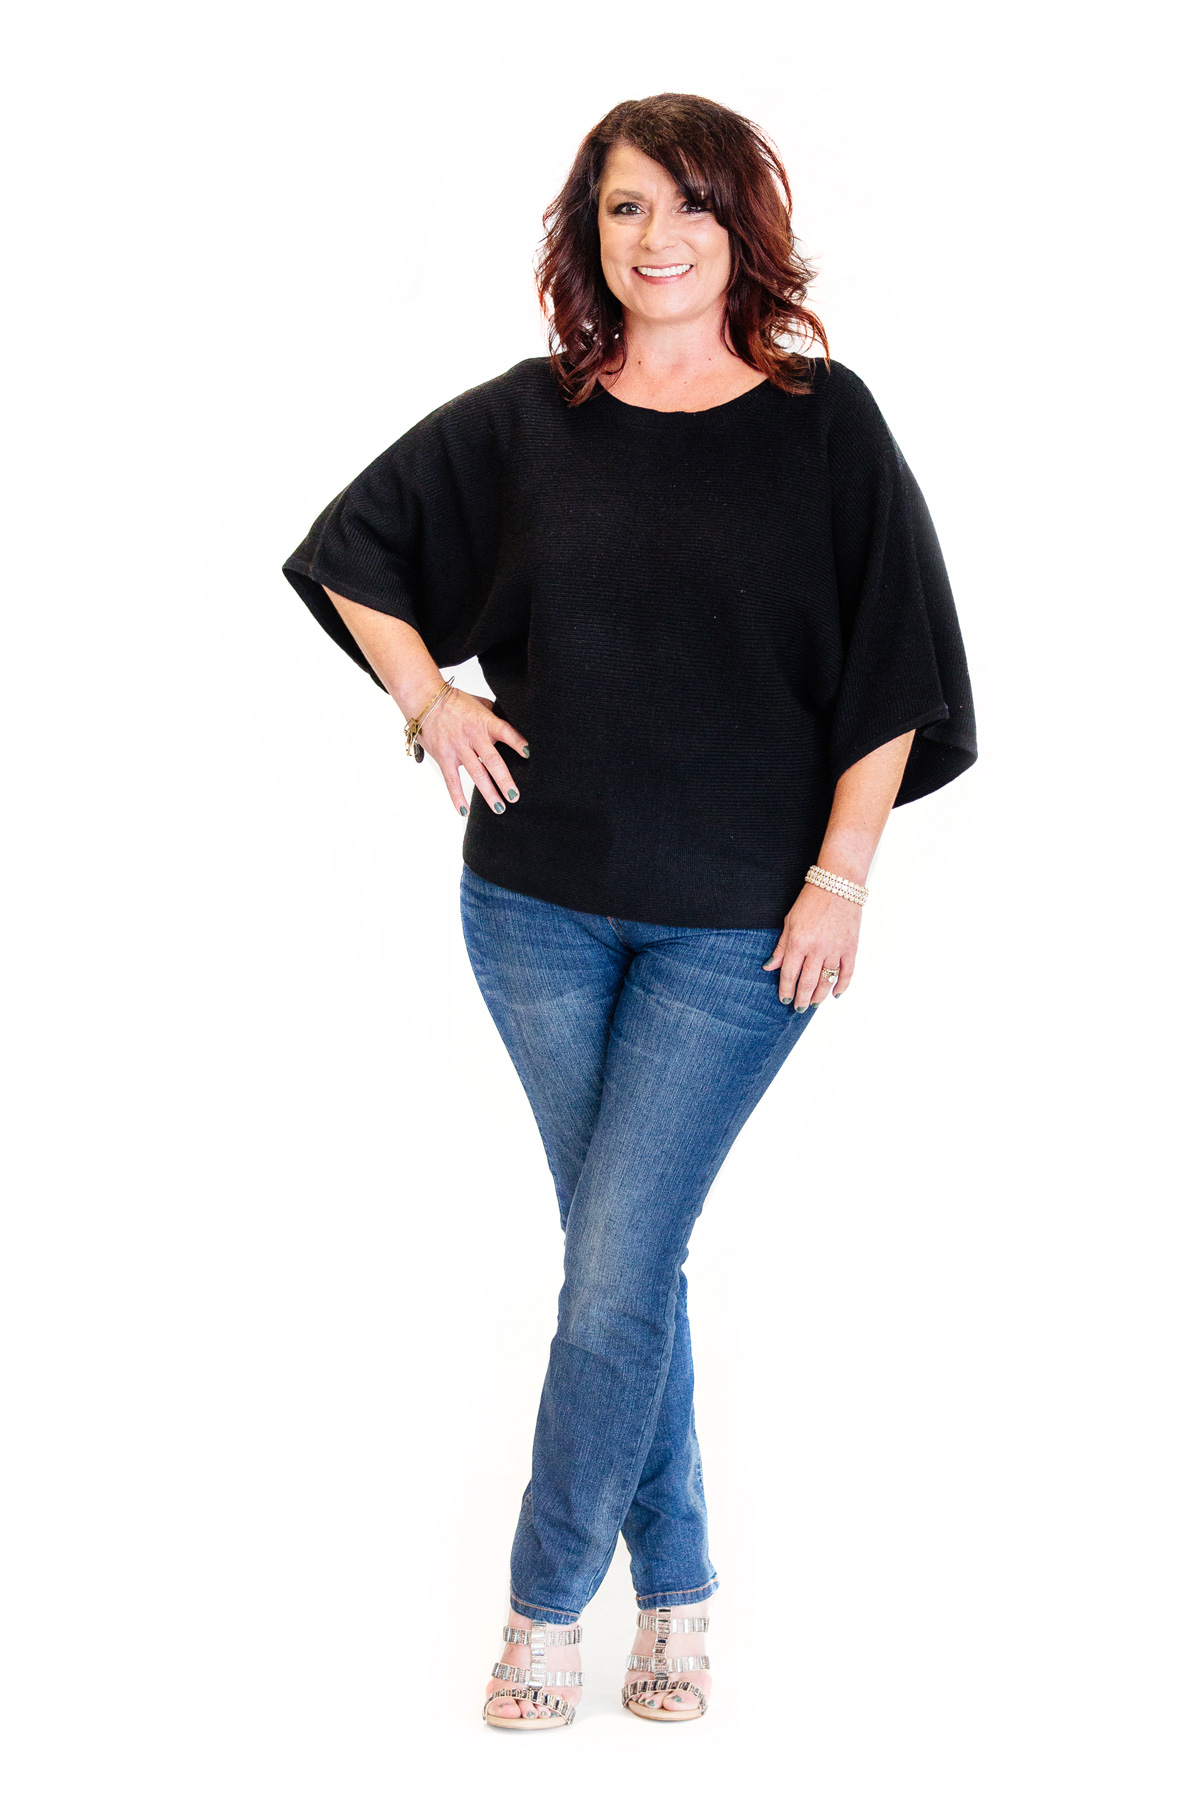 B105 radio personality Chelsie, wearing a black top and jeans for her blog with The Christ Hospital.